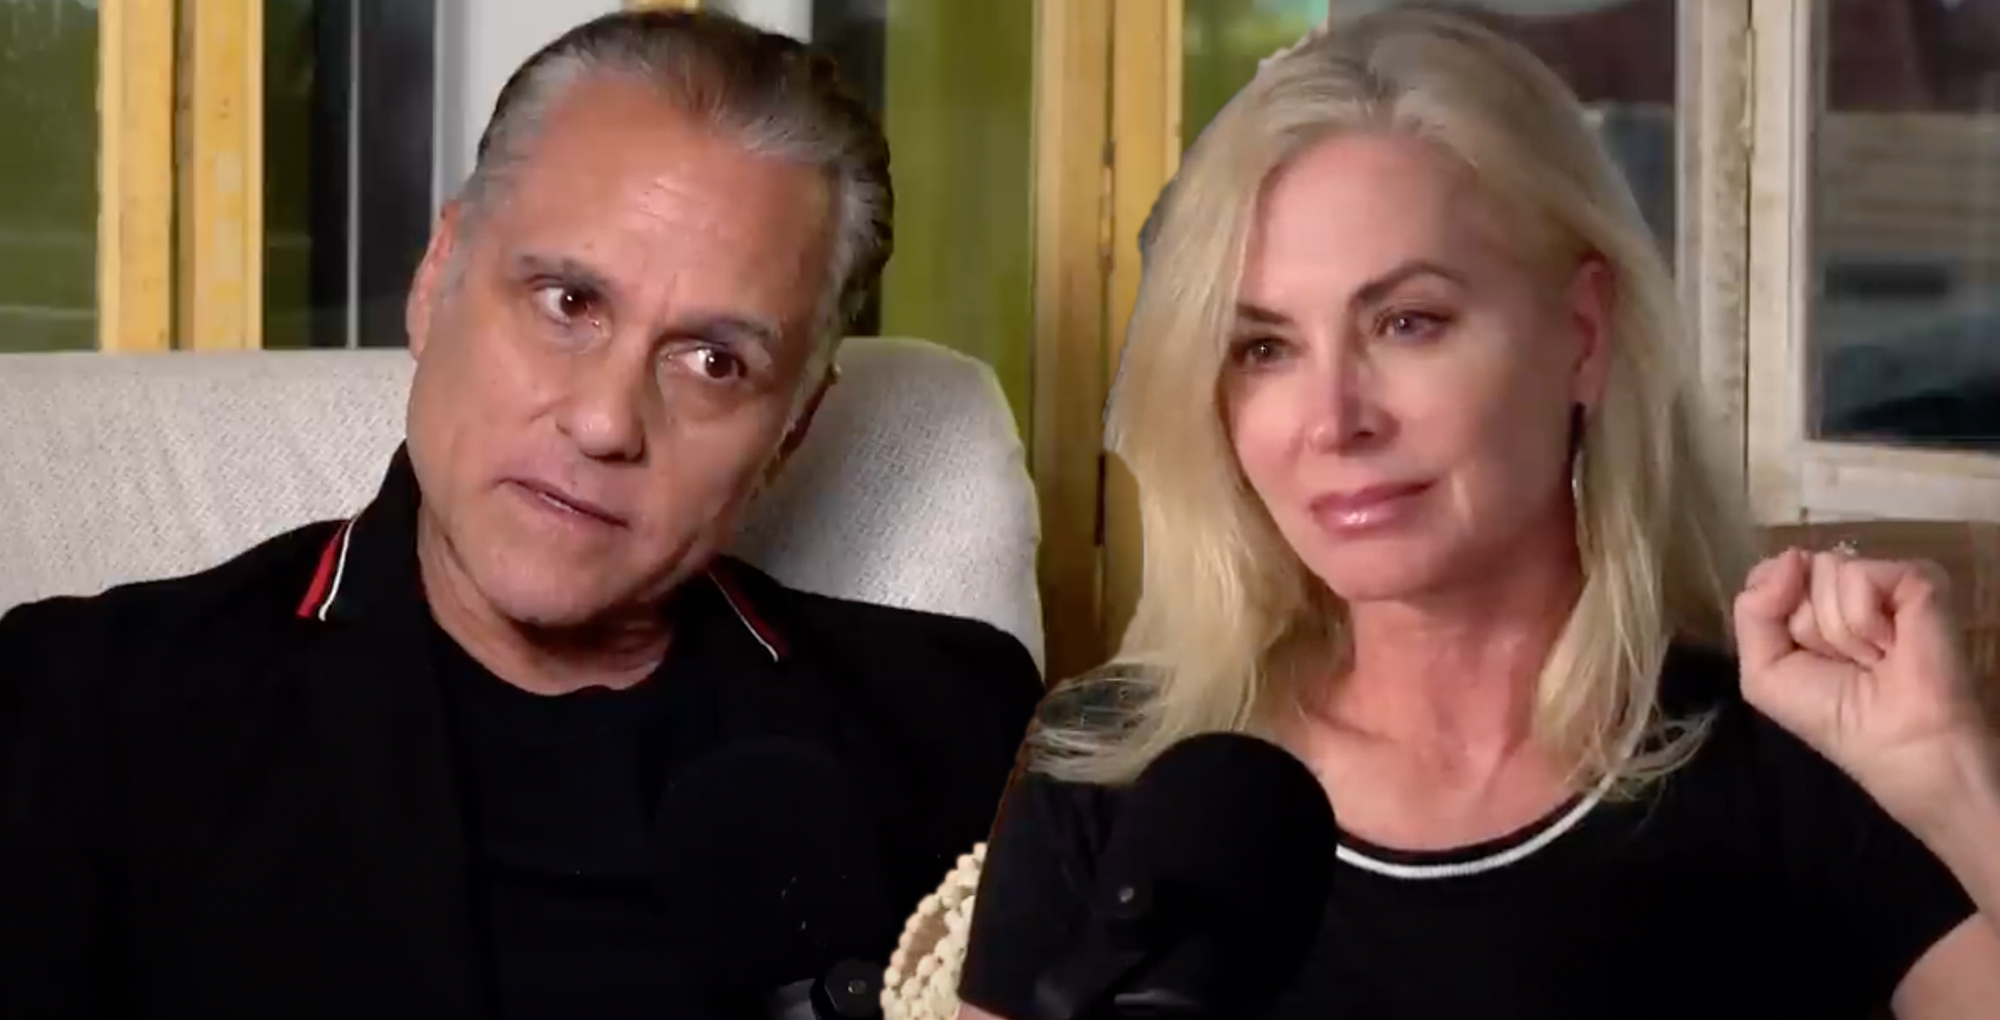 maurice benard hosted eileen davidson on his video podcast series state of mind.